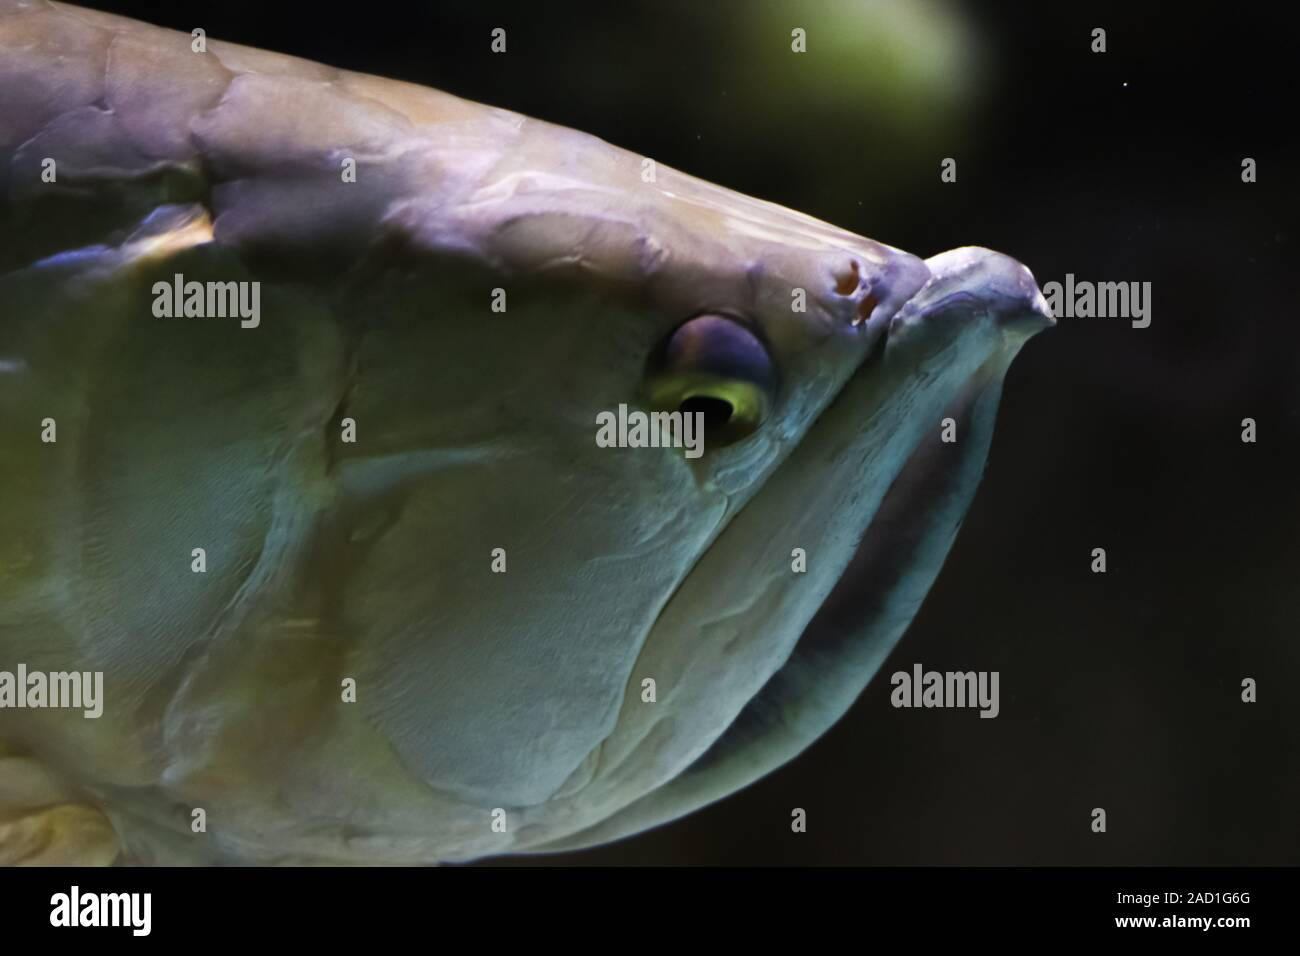 Close-up portrait of the head of a strange ocean fish. Face of fish in focus on a black background. The natural environment under water. Side view Stock Photo